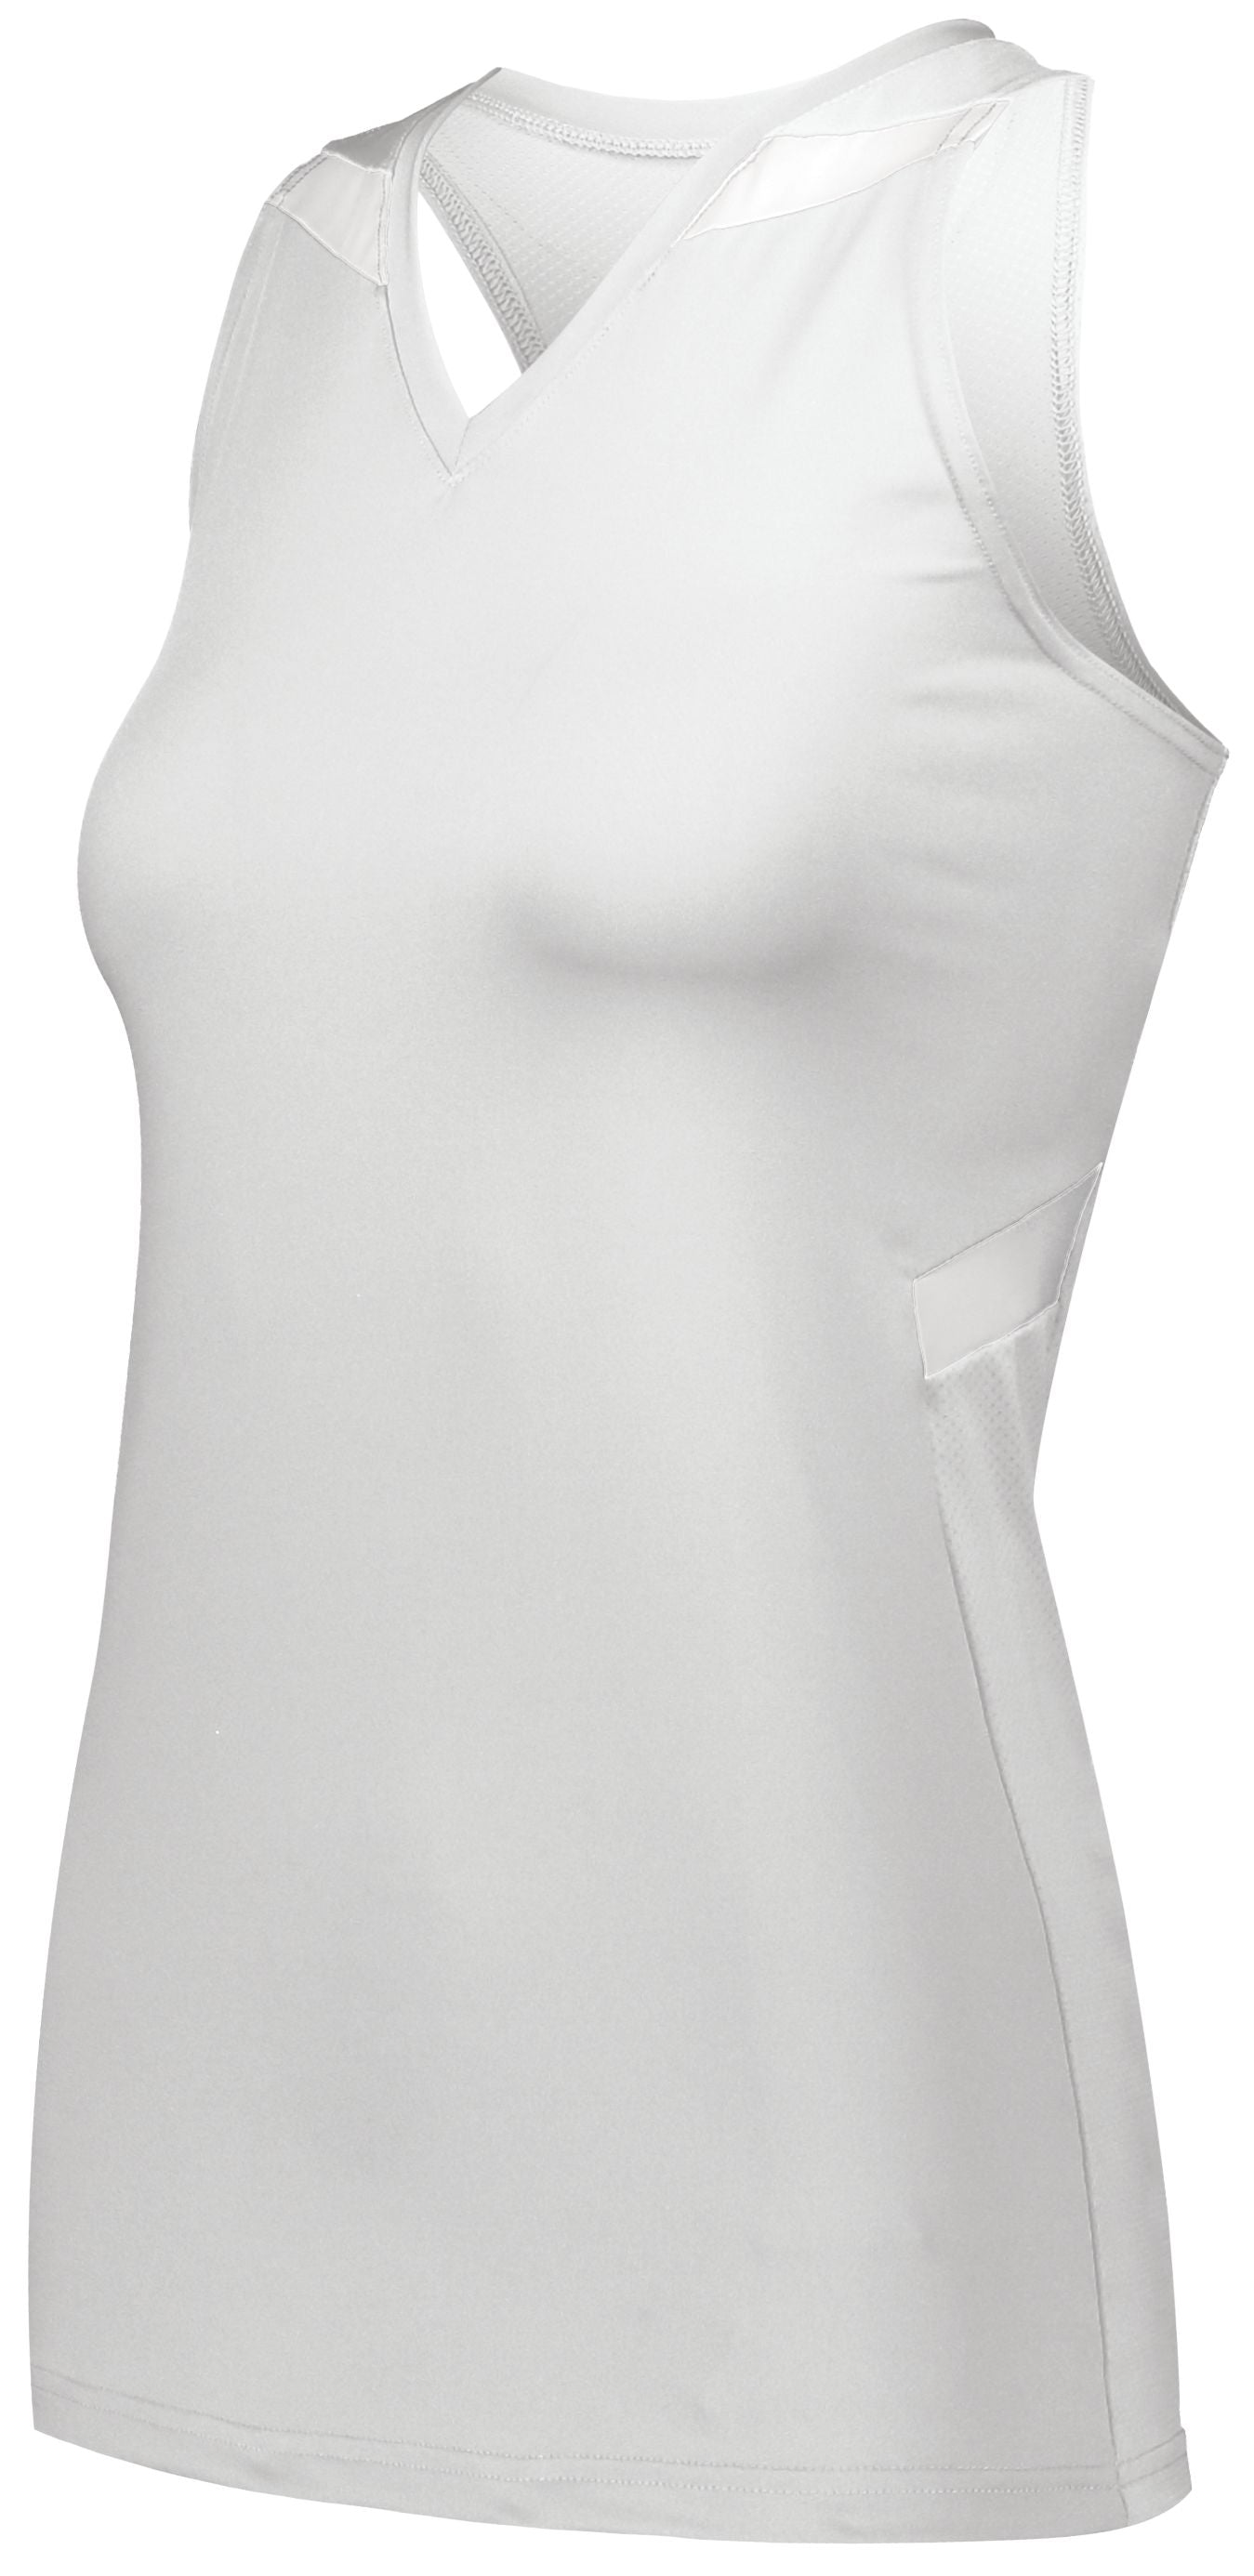 Holloway Ladies Pr Max Compression Jersey in White/White  -Part of the Ladies, Ladies-Jersey, Track-Field, Holloway, Shirts product lines at KanaleyCreations.com